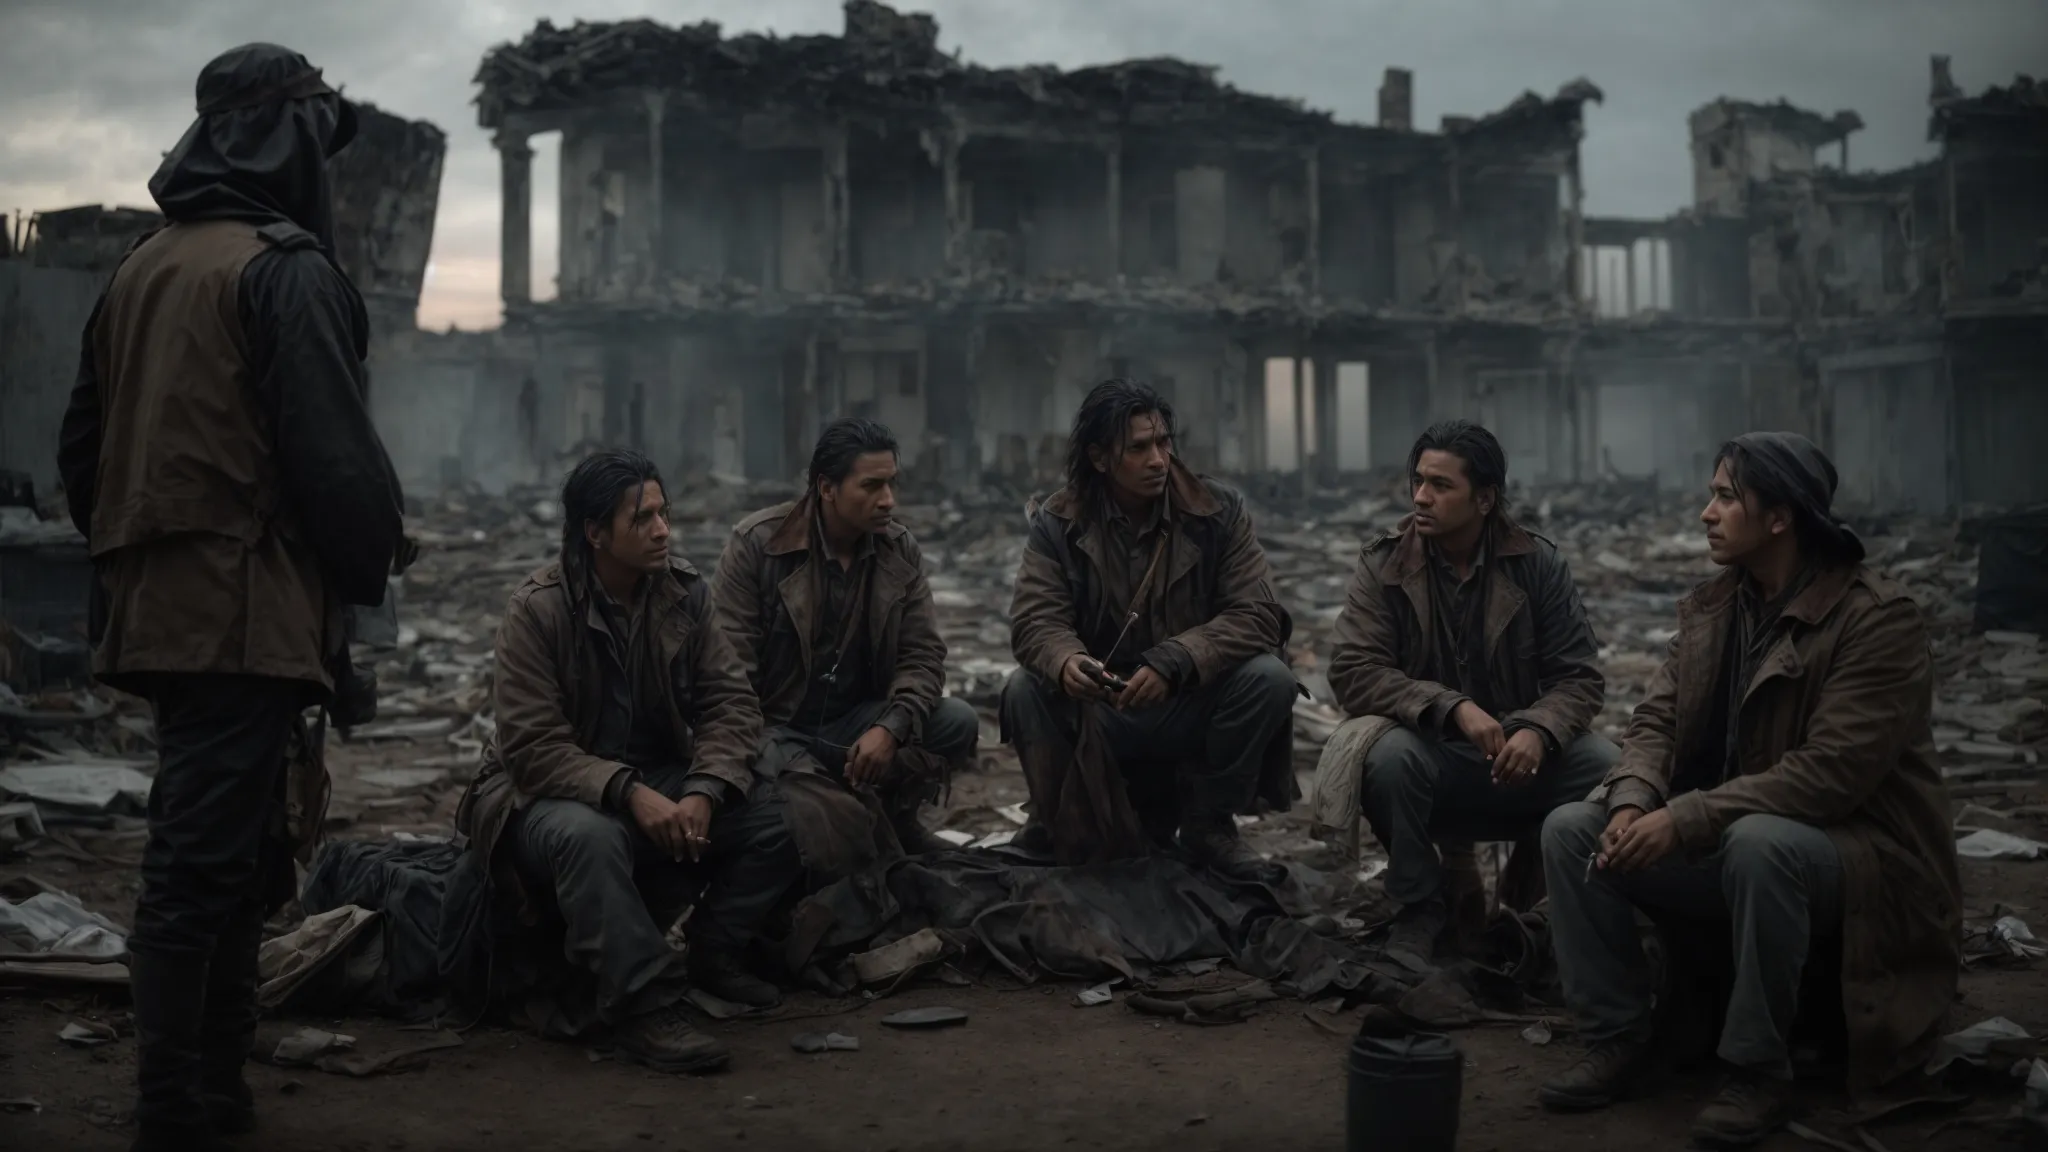 a group of actors in costume and makeup have a discussion on a post-apocalyptic set dotted with ruined buildings under a dusky sky.